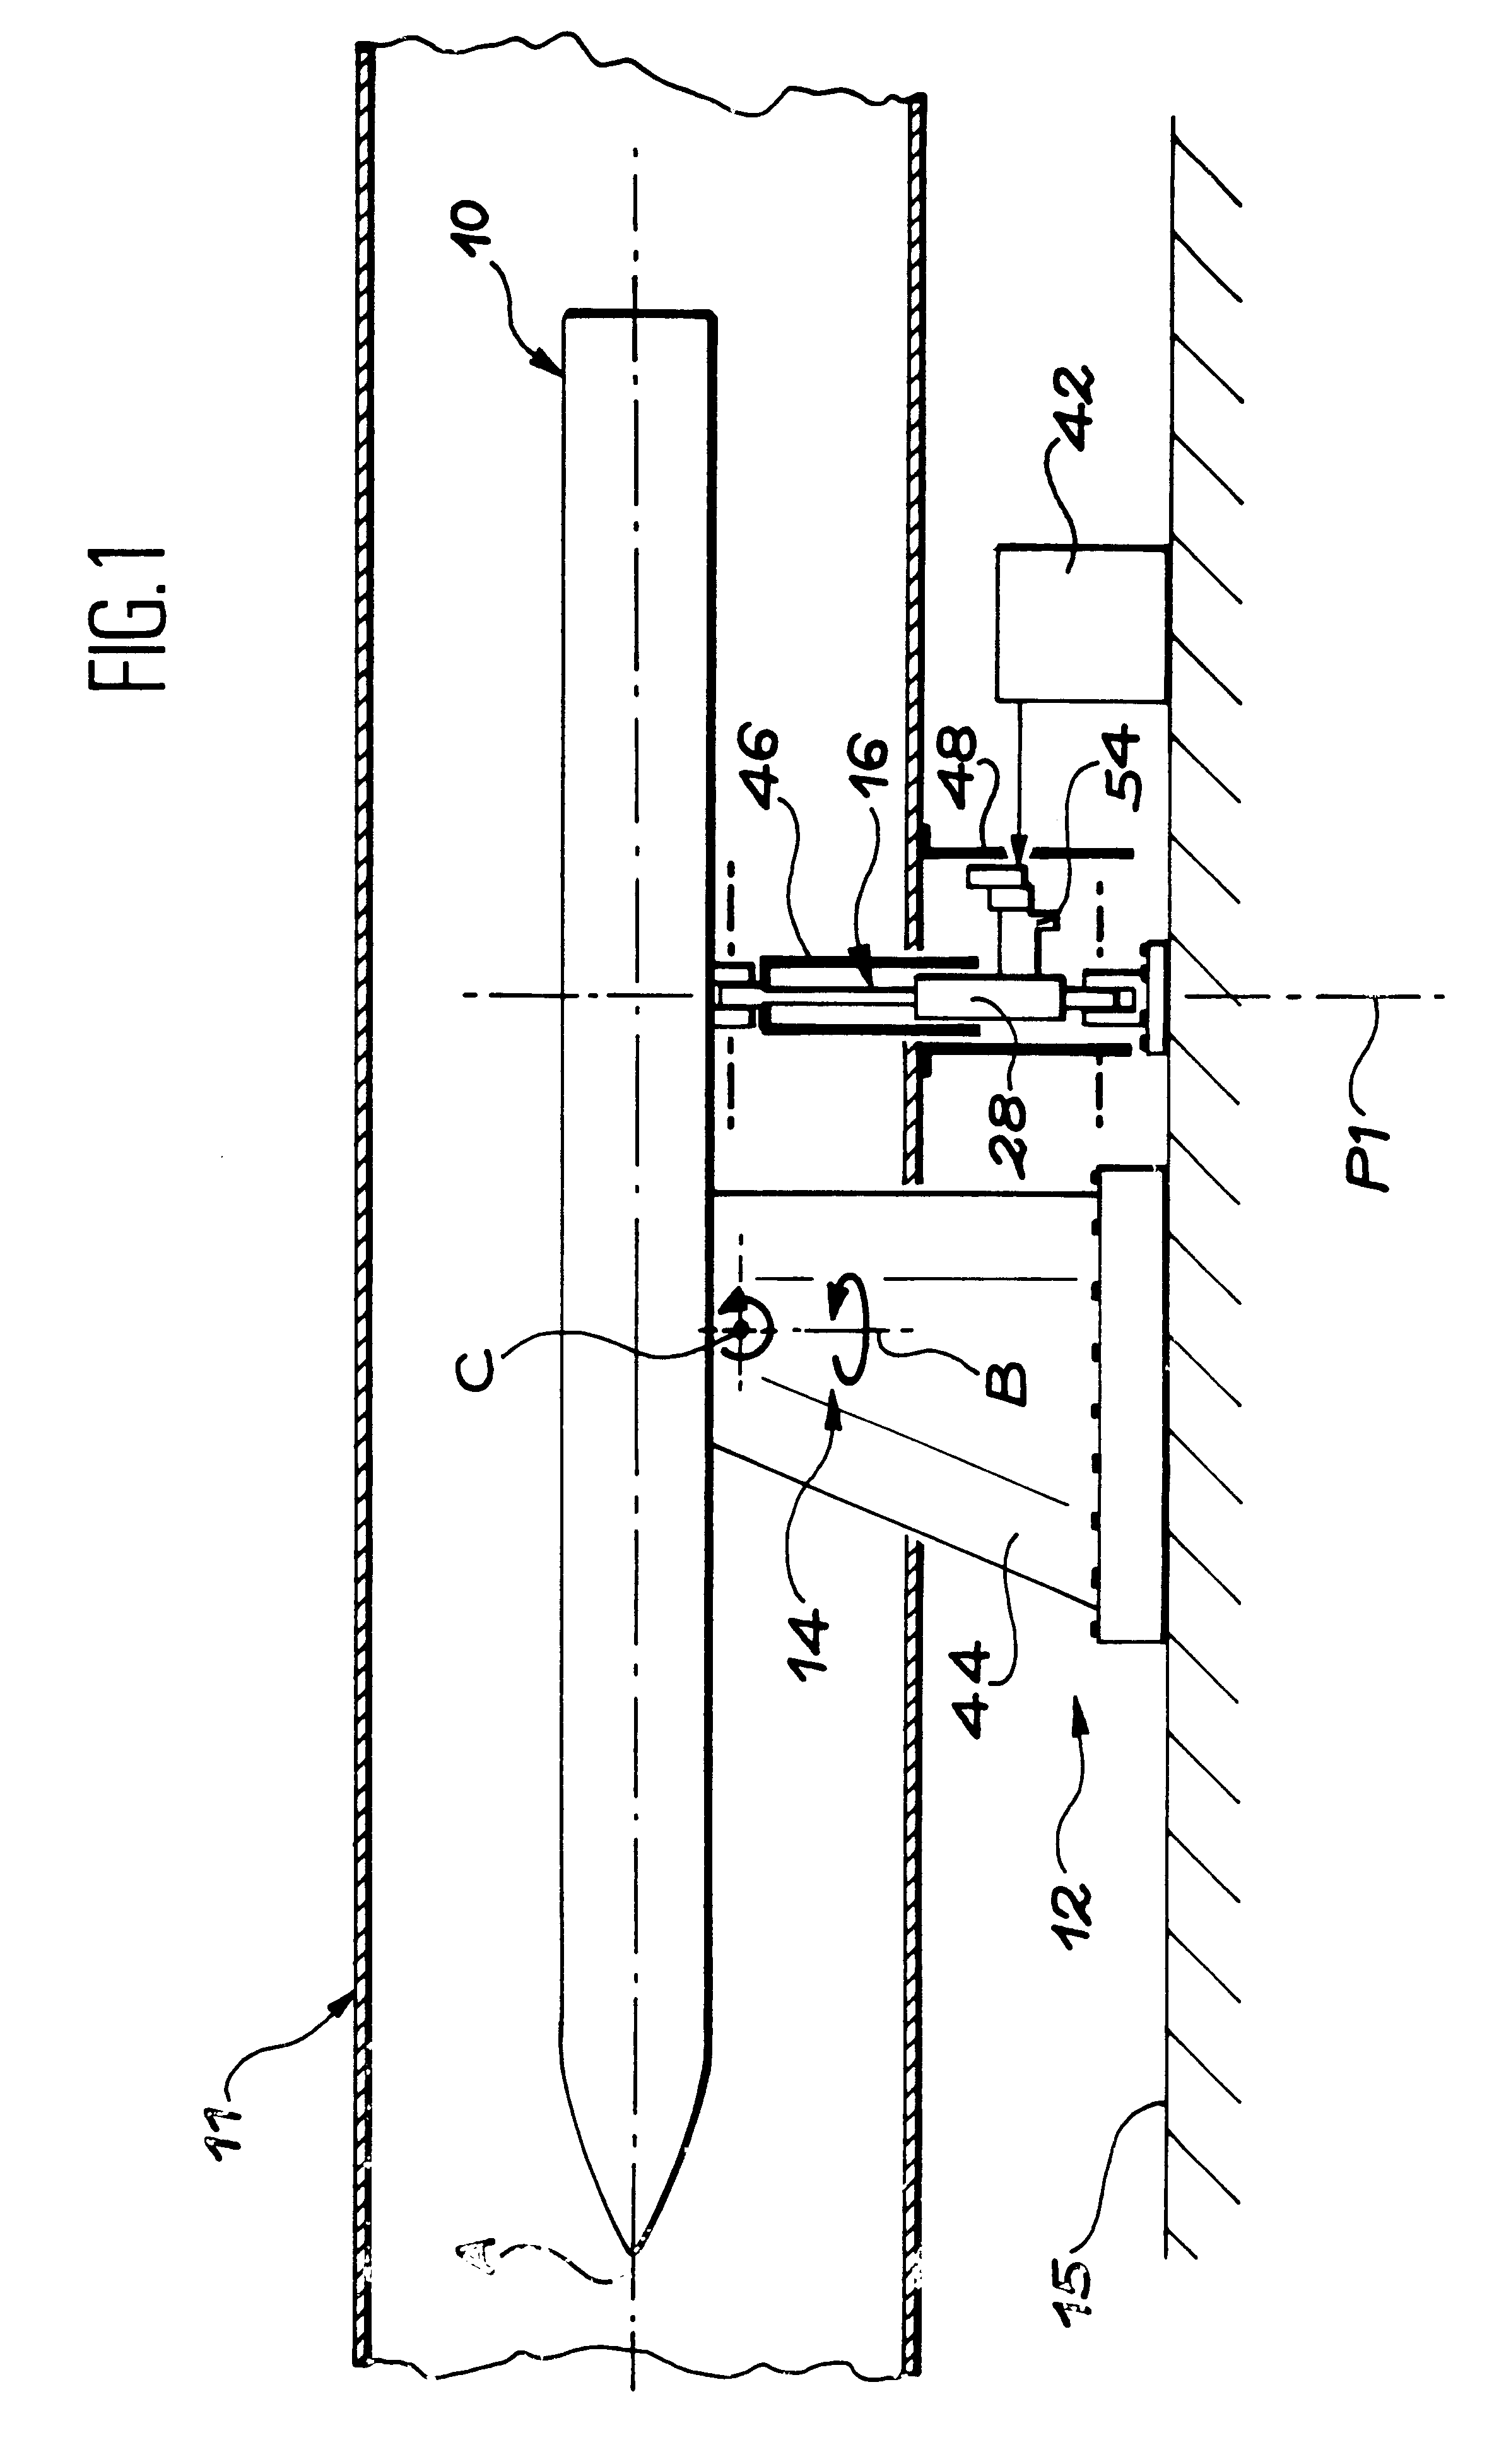 Support device for a motorized flying instrument in a wind tunnel